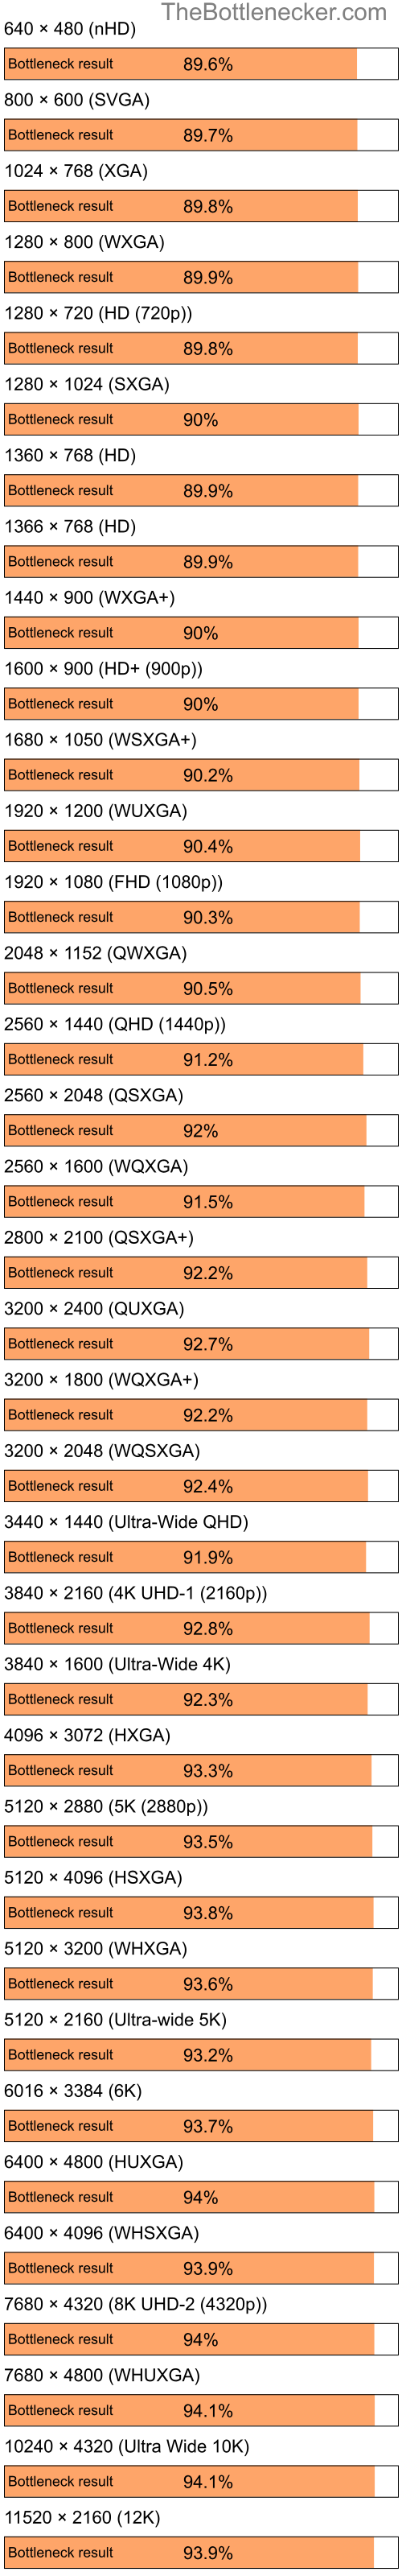 Bottleneck results by resolution for Intel Pentium 4 and AMD Mobility Radeon 9000 in General Tasks